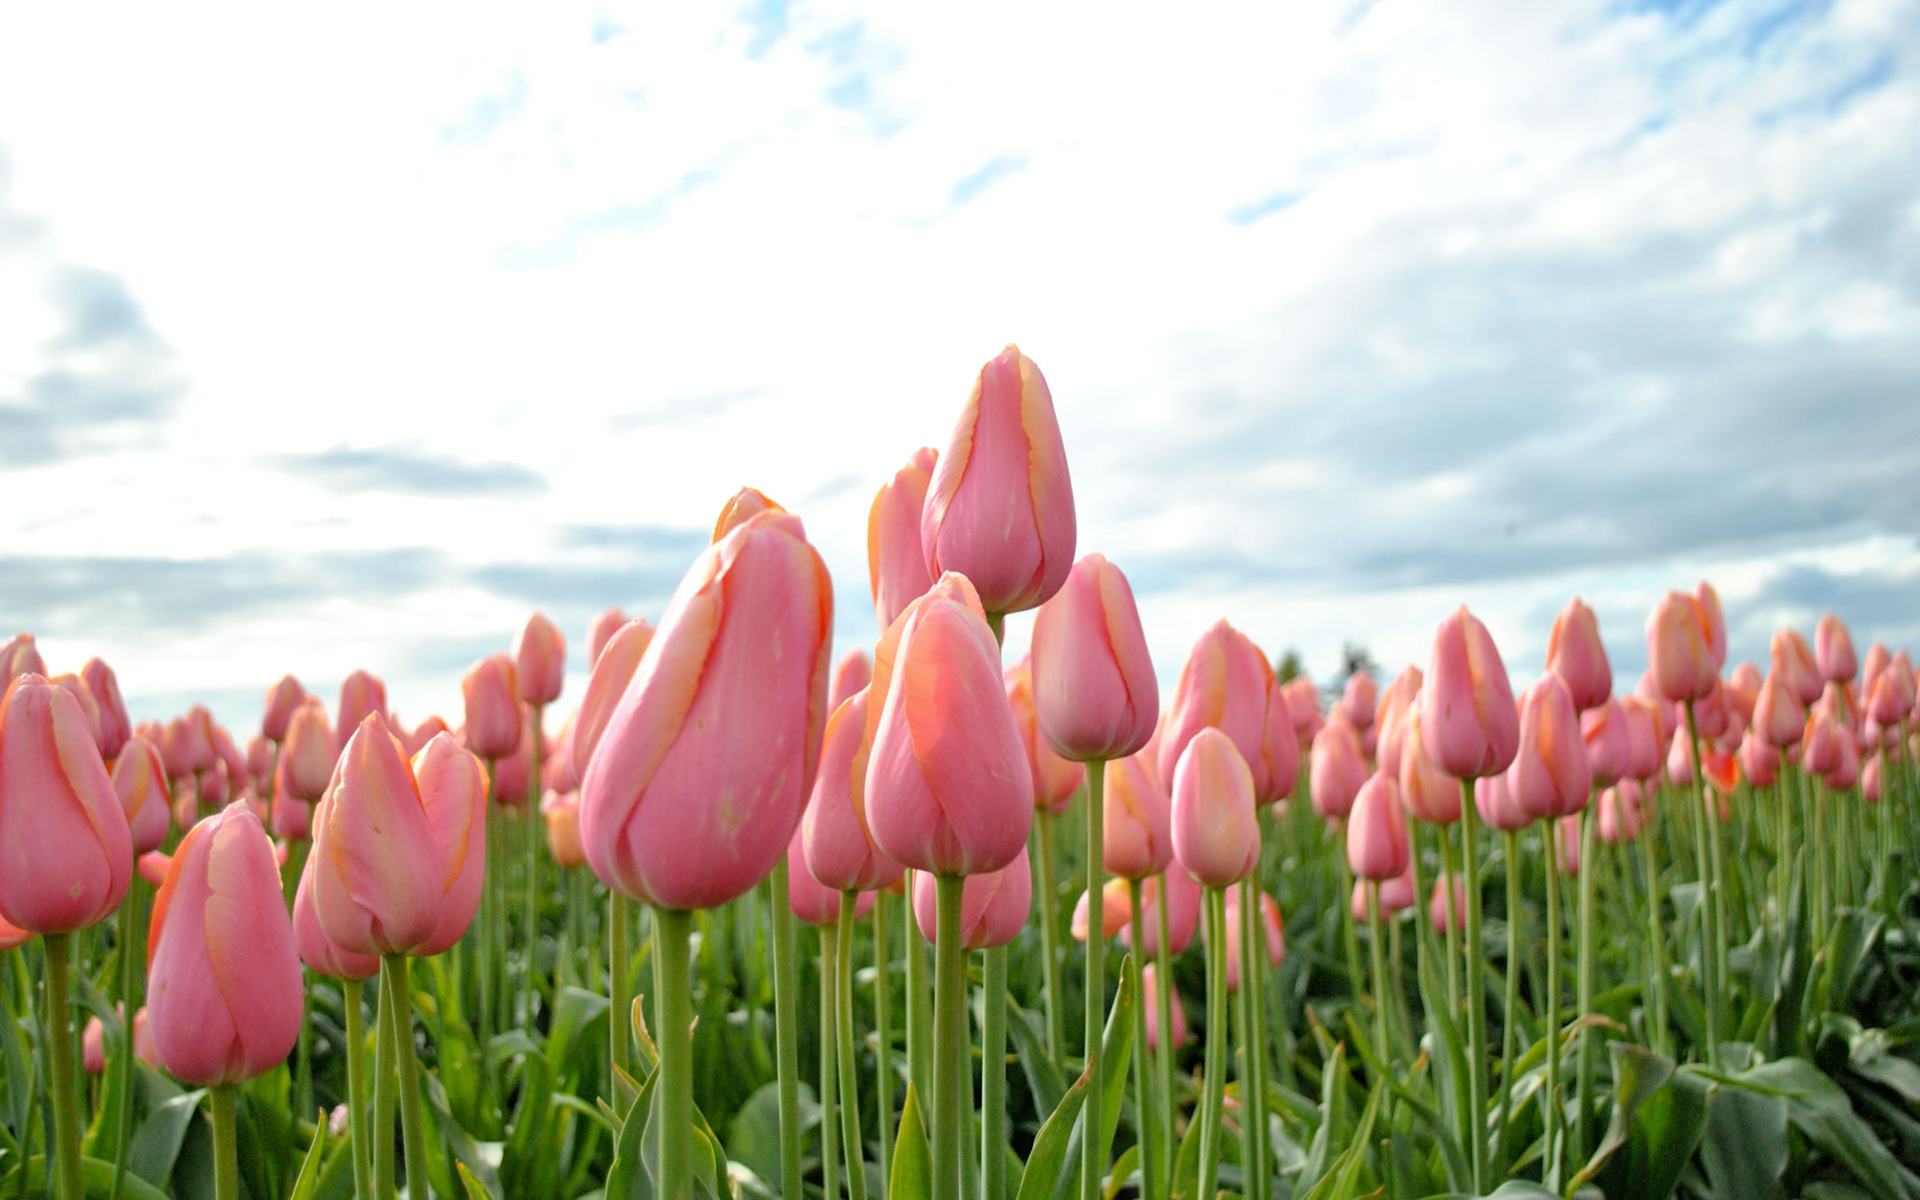 A field of pink tulips against a cloudy sky. - Garden